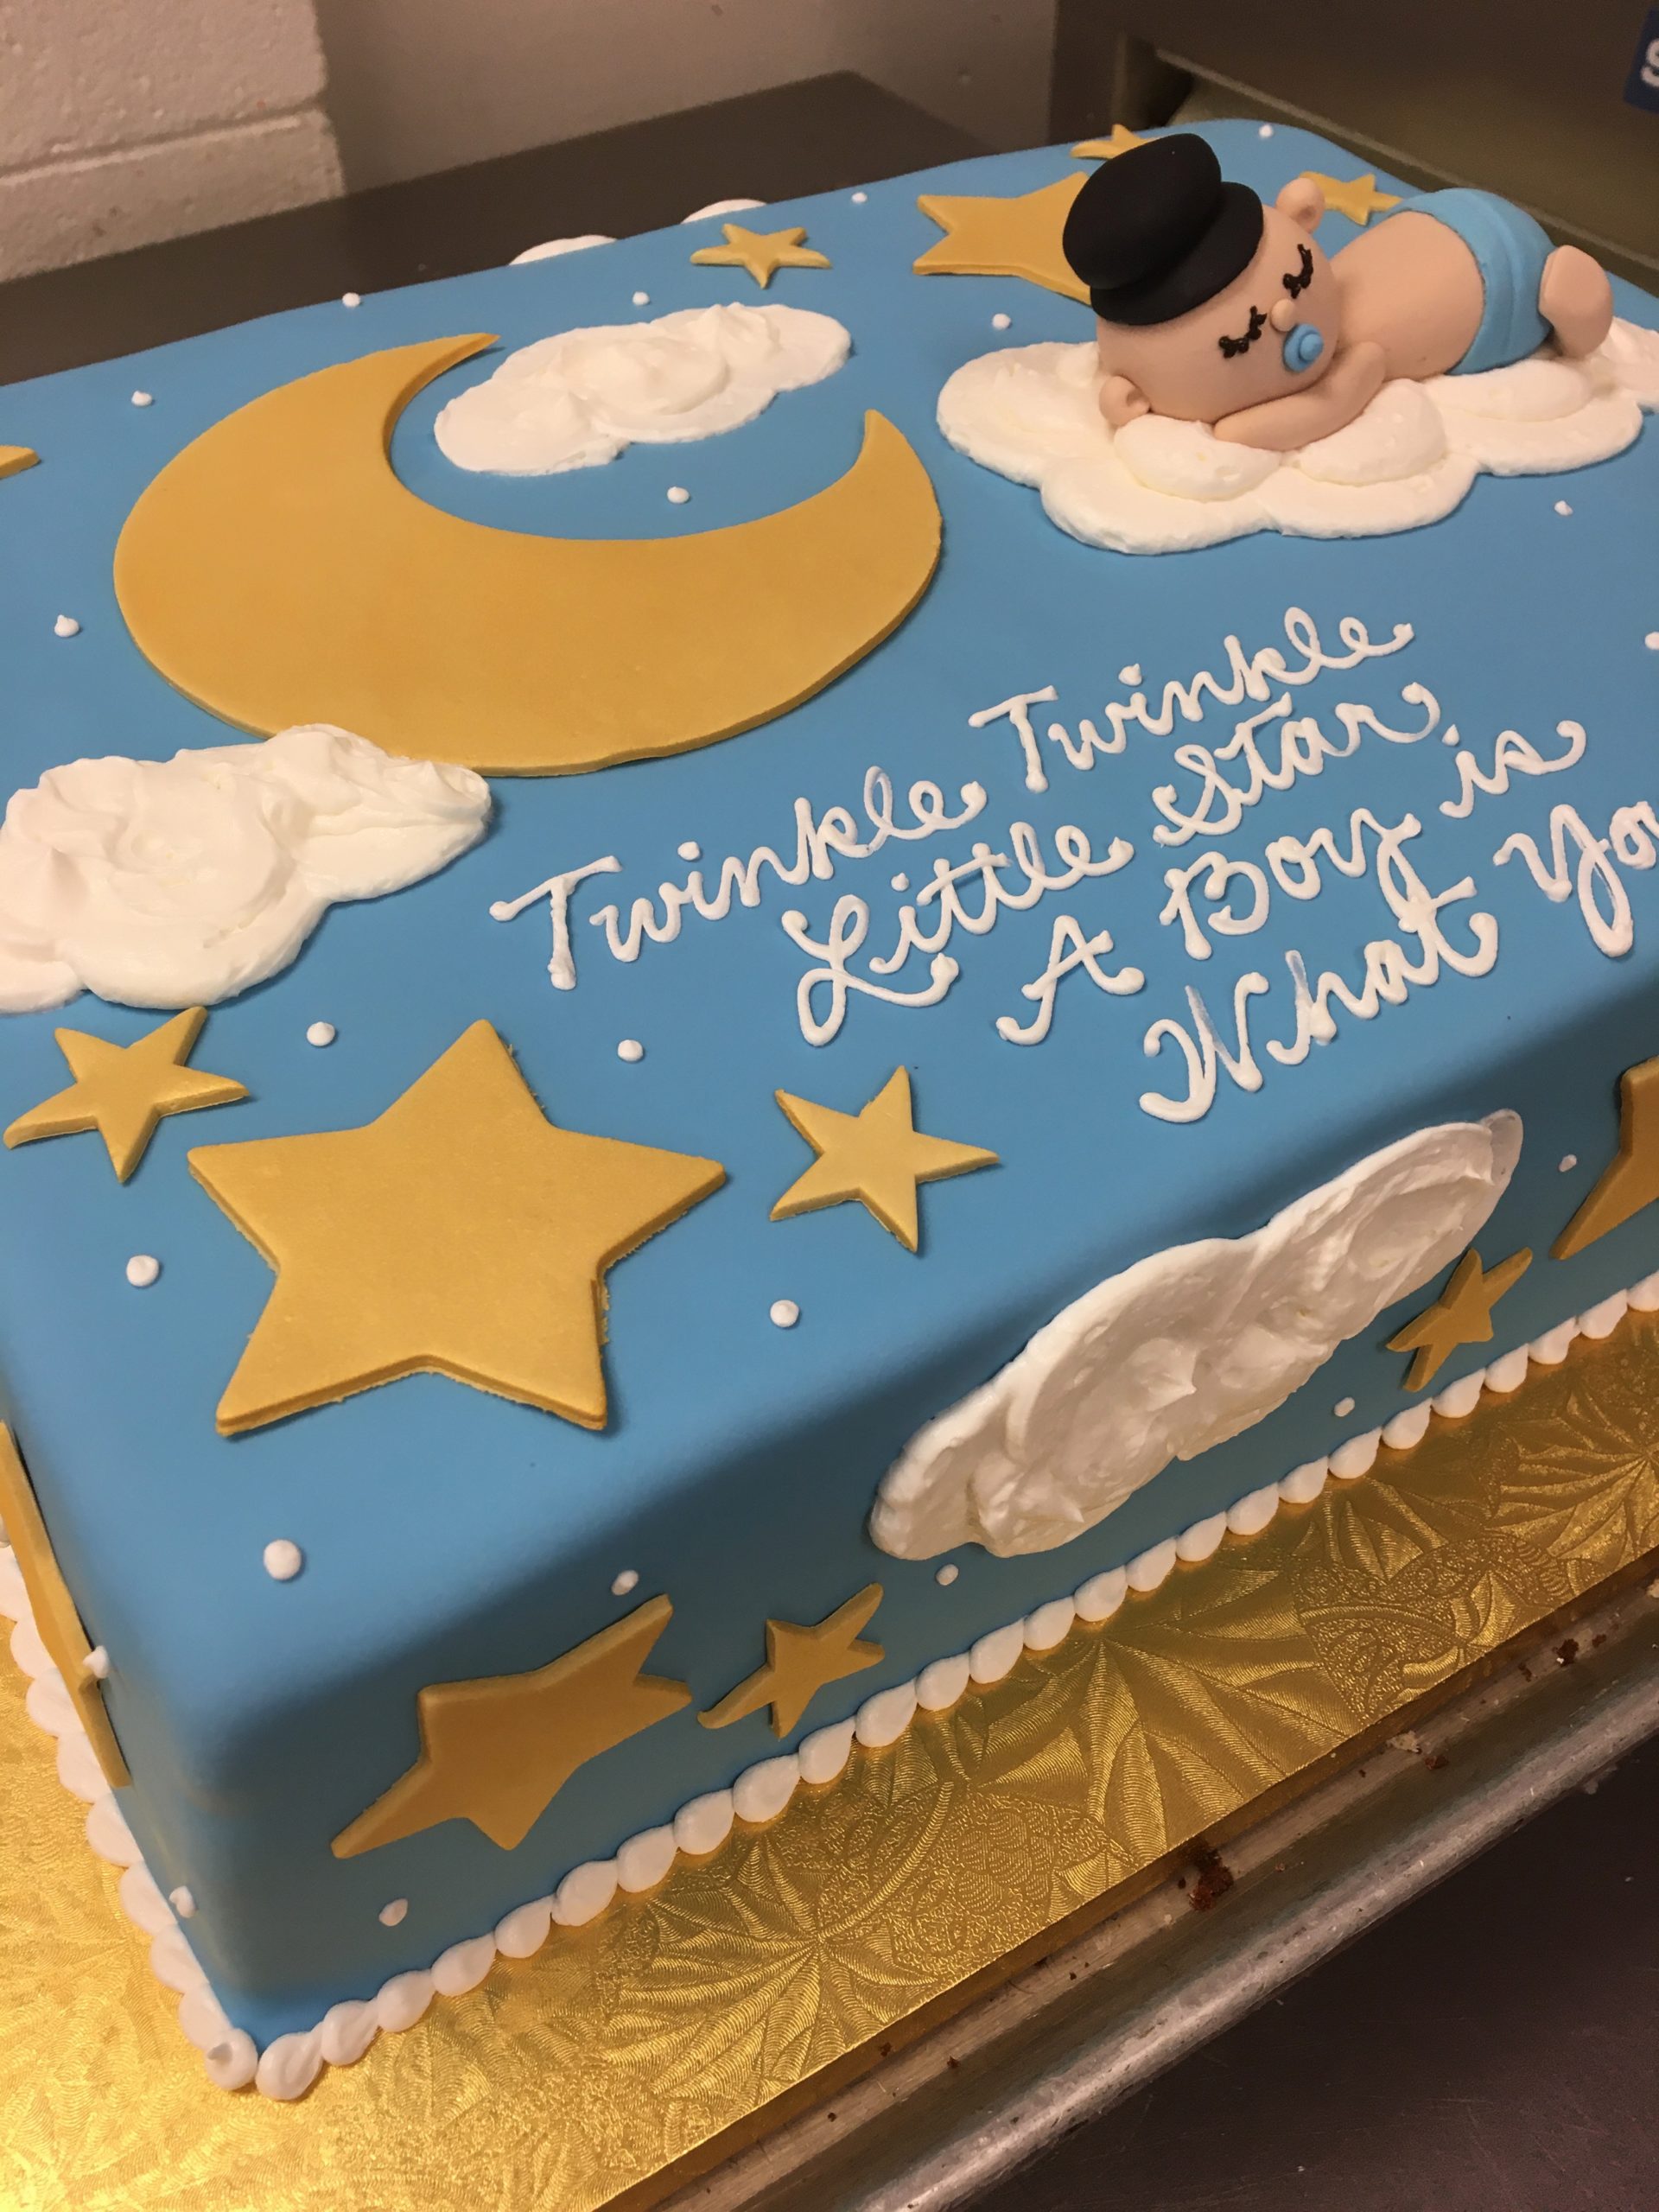 Blue fondant with gold stars, moon, clouds, and sculpted baby